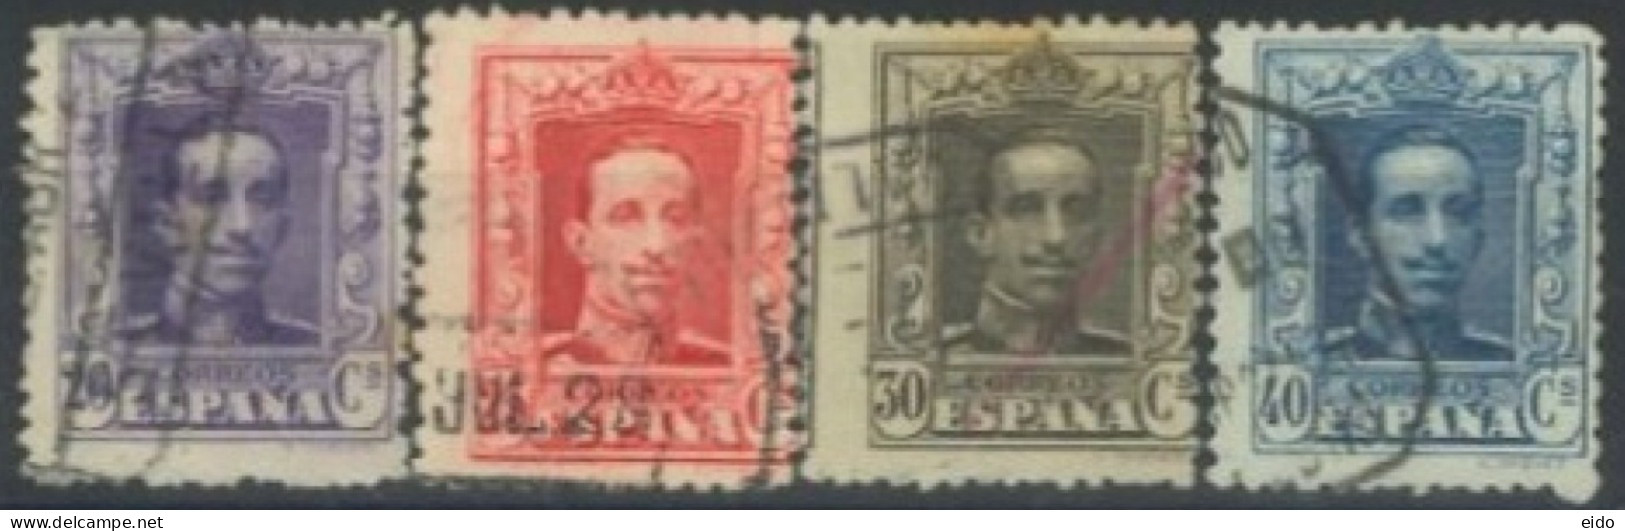 SPAIN, 1922/26, KING ALFONSO XIII STAMPS SET OF 4 # 337/40, USED. - Usados